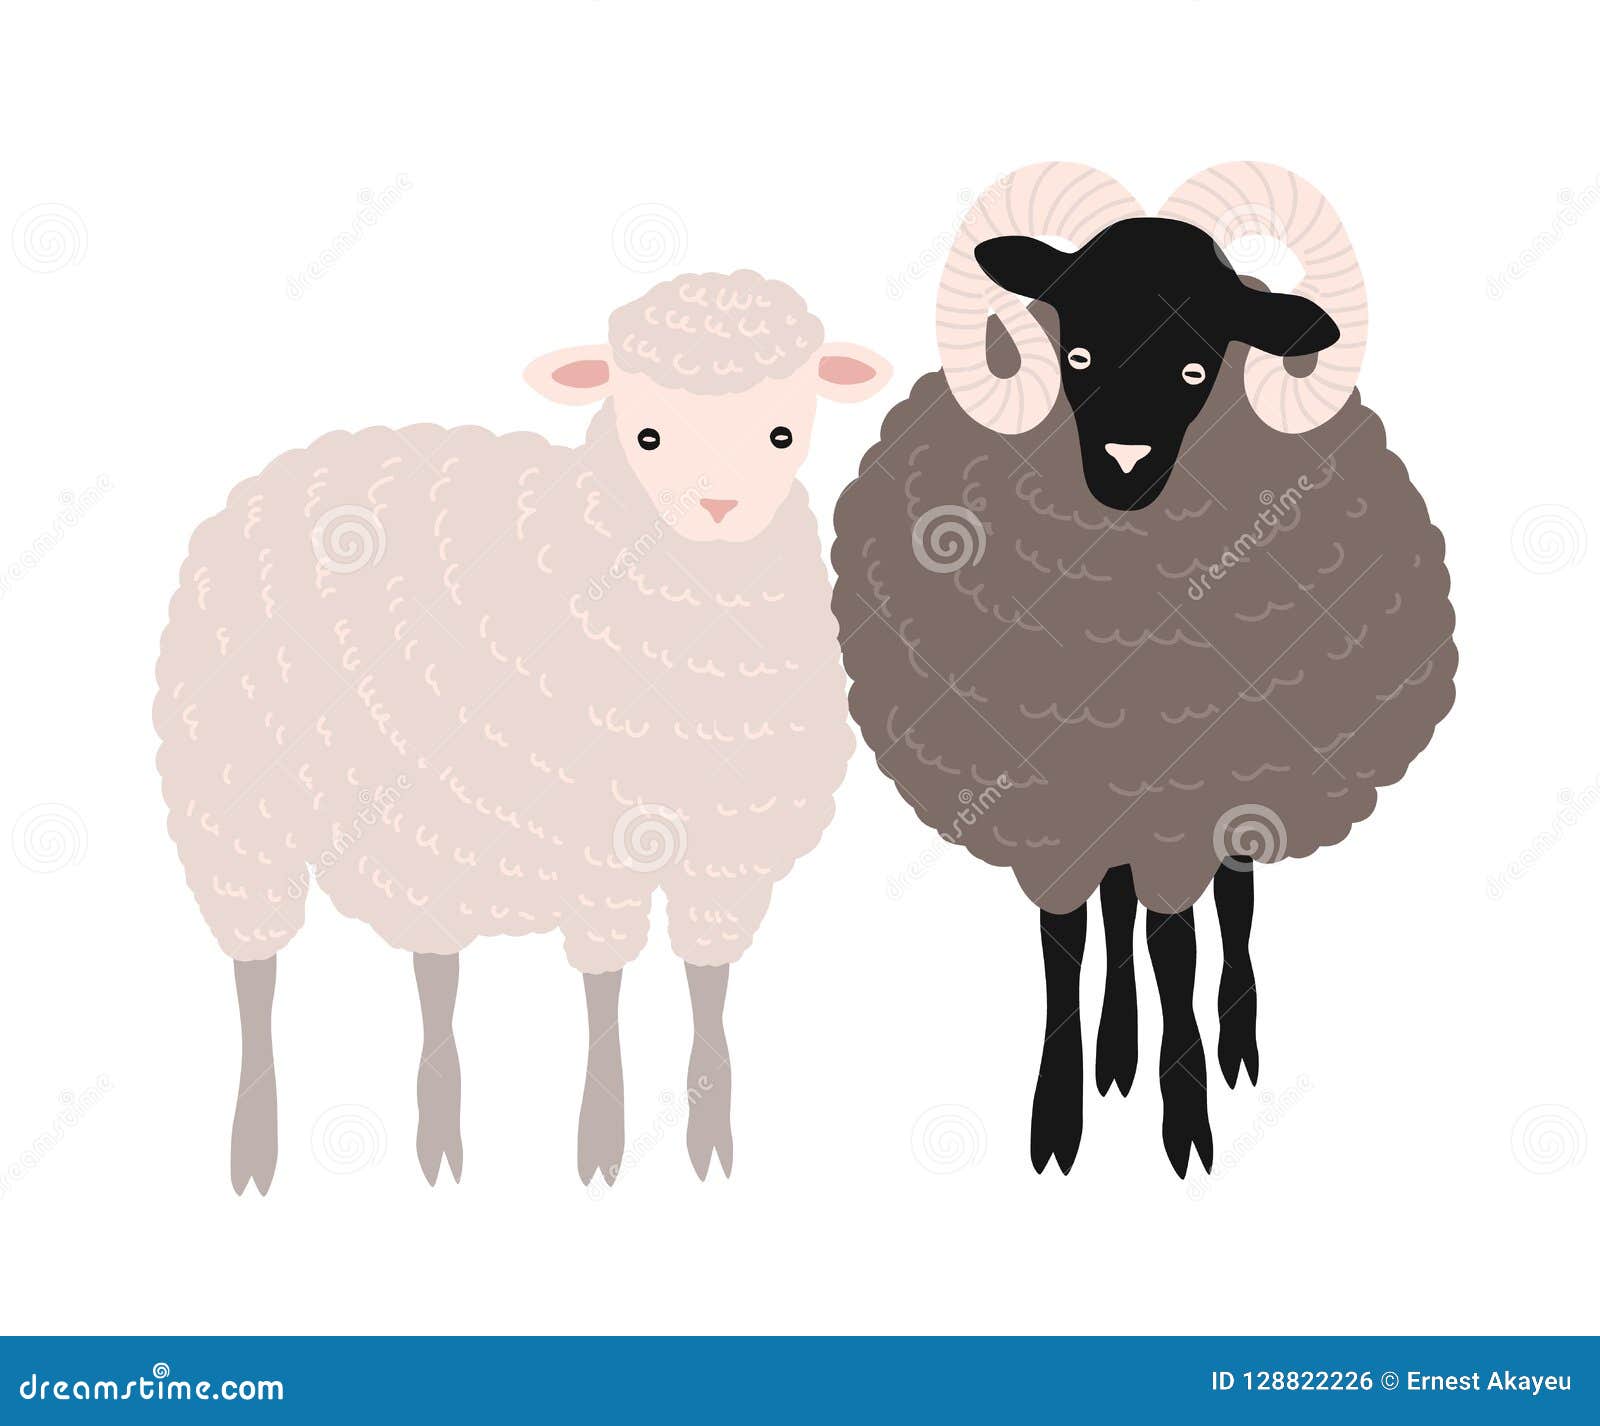 pair of sheep and ram standing together. adorable barnyard domestic ruminant animals or farm livestock  on white